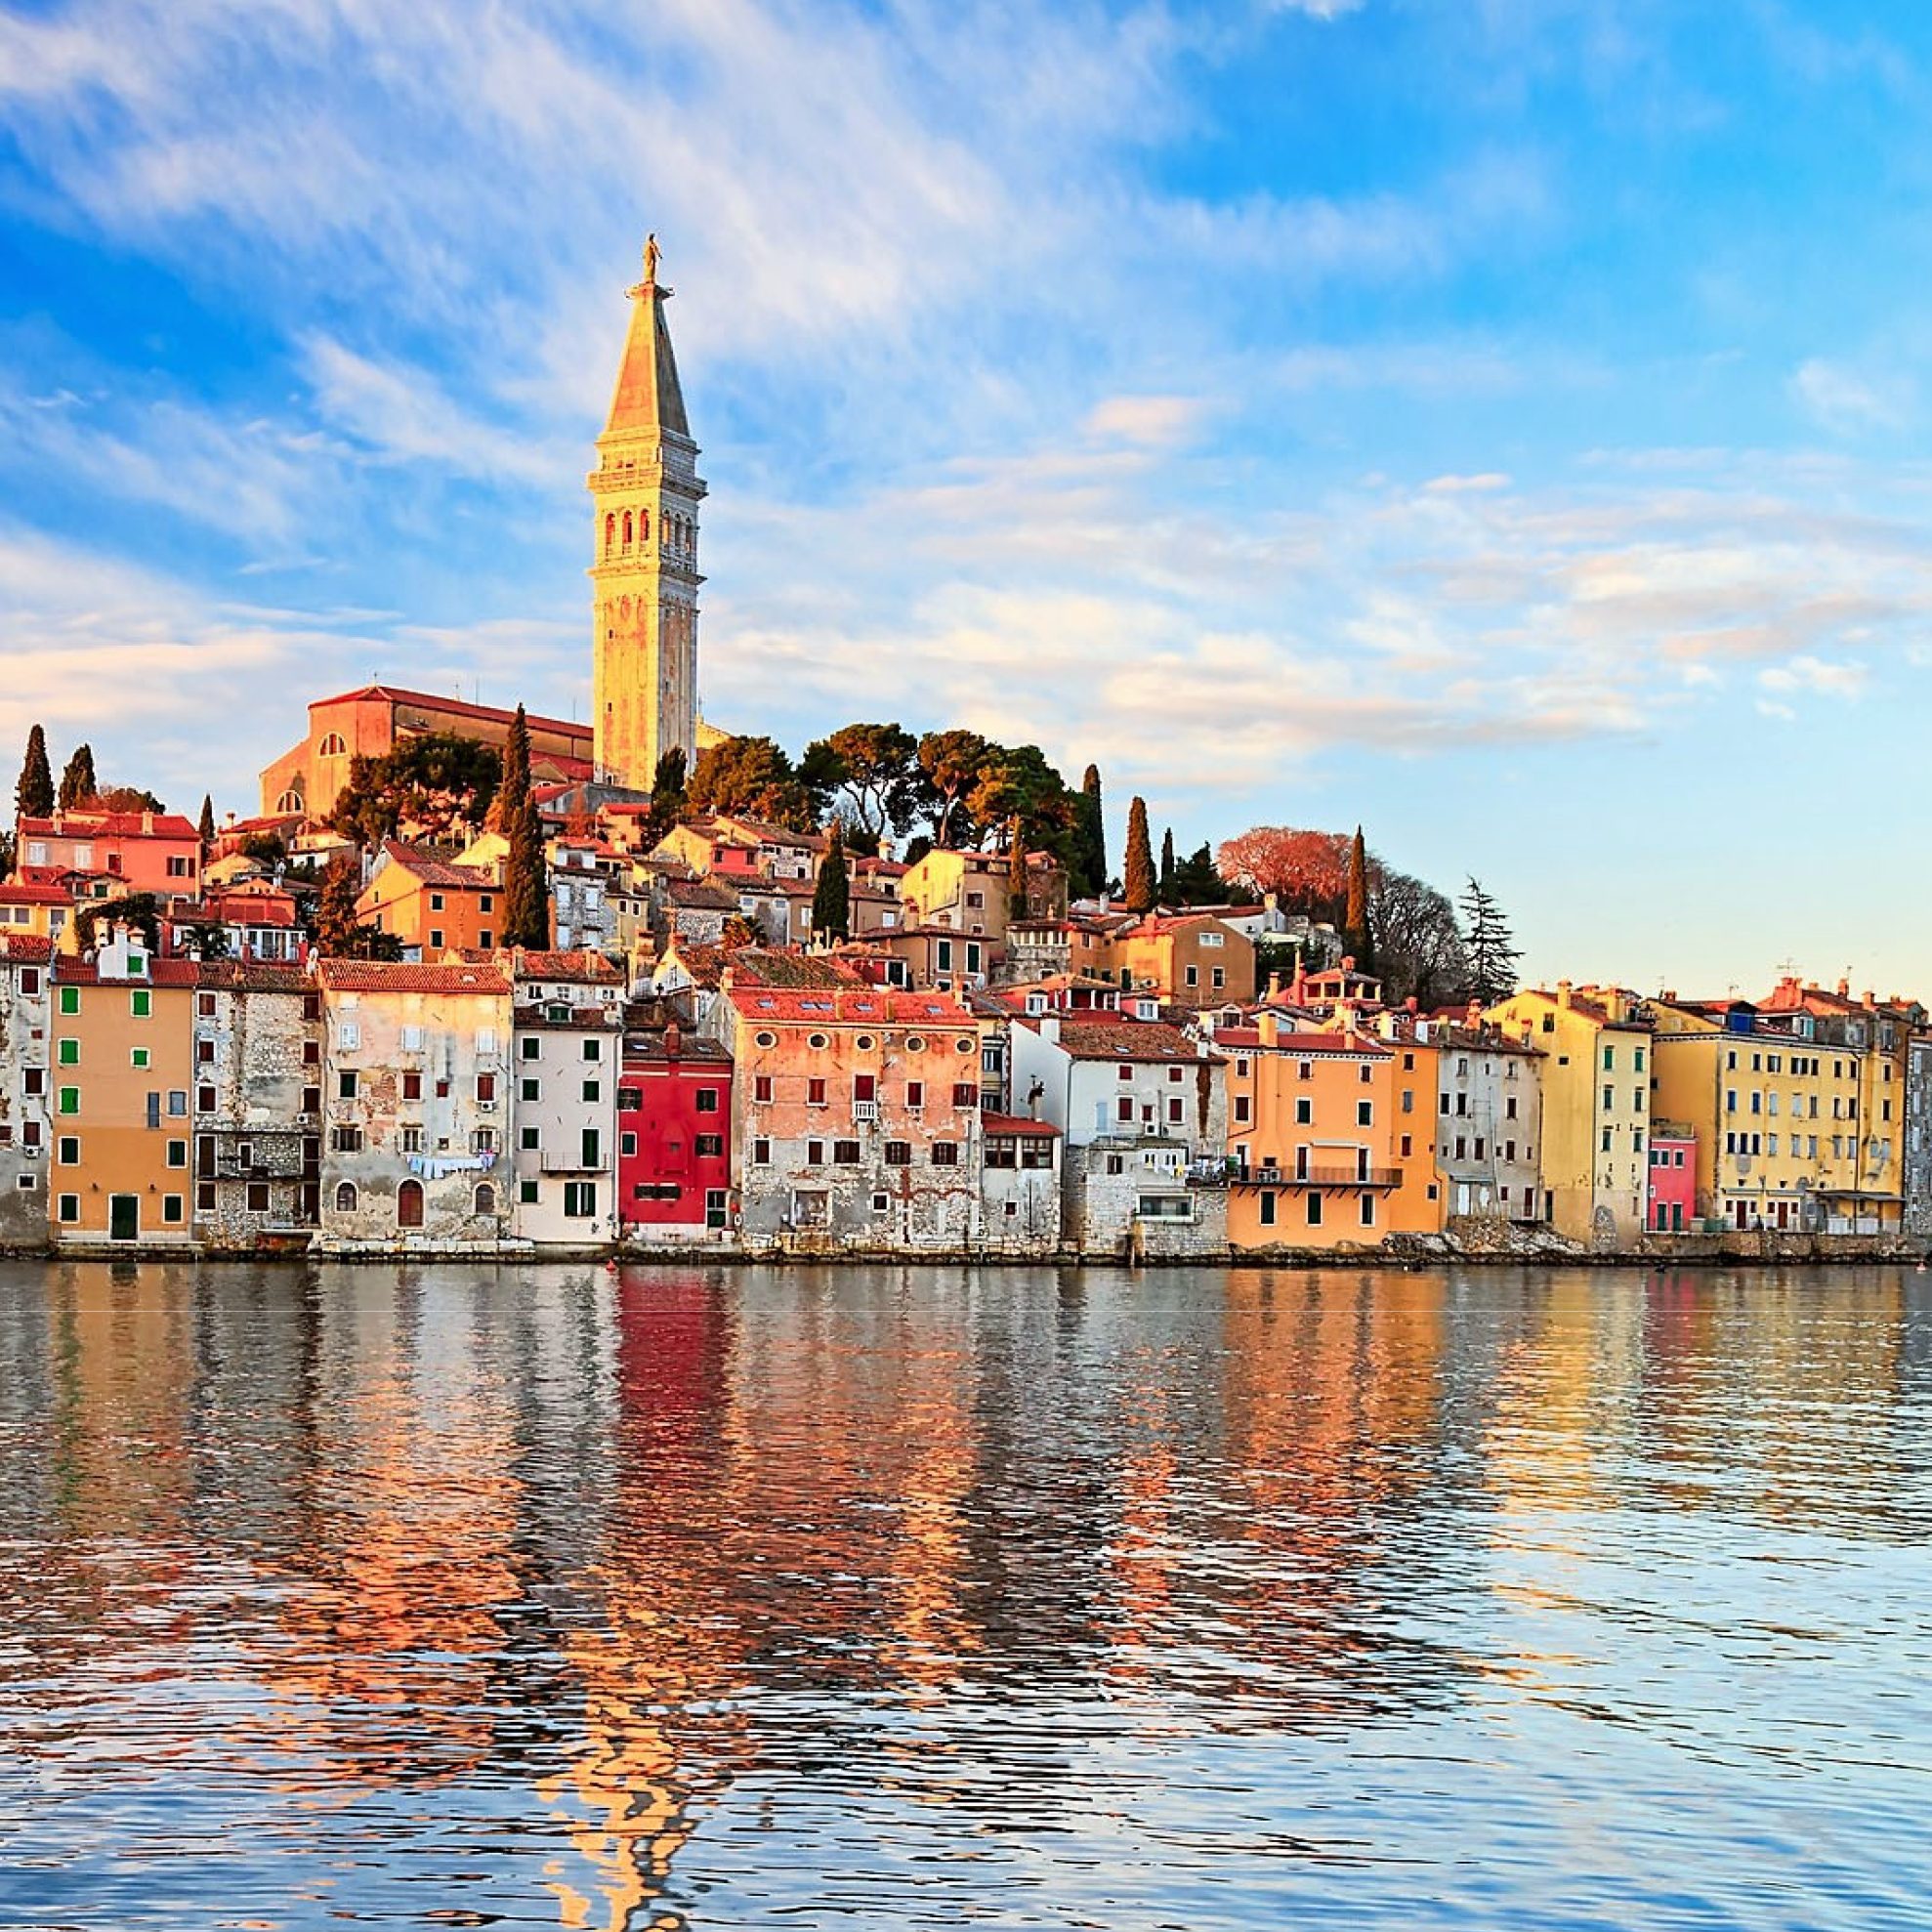 Take a trip to Croatia with Upper Valley Business Alliance